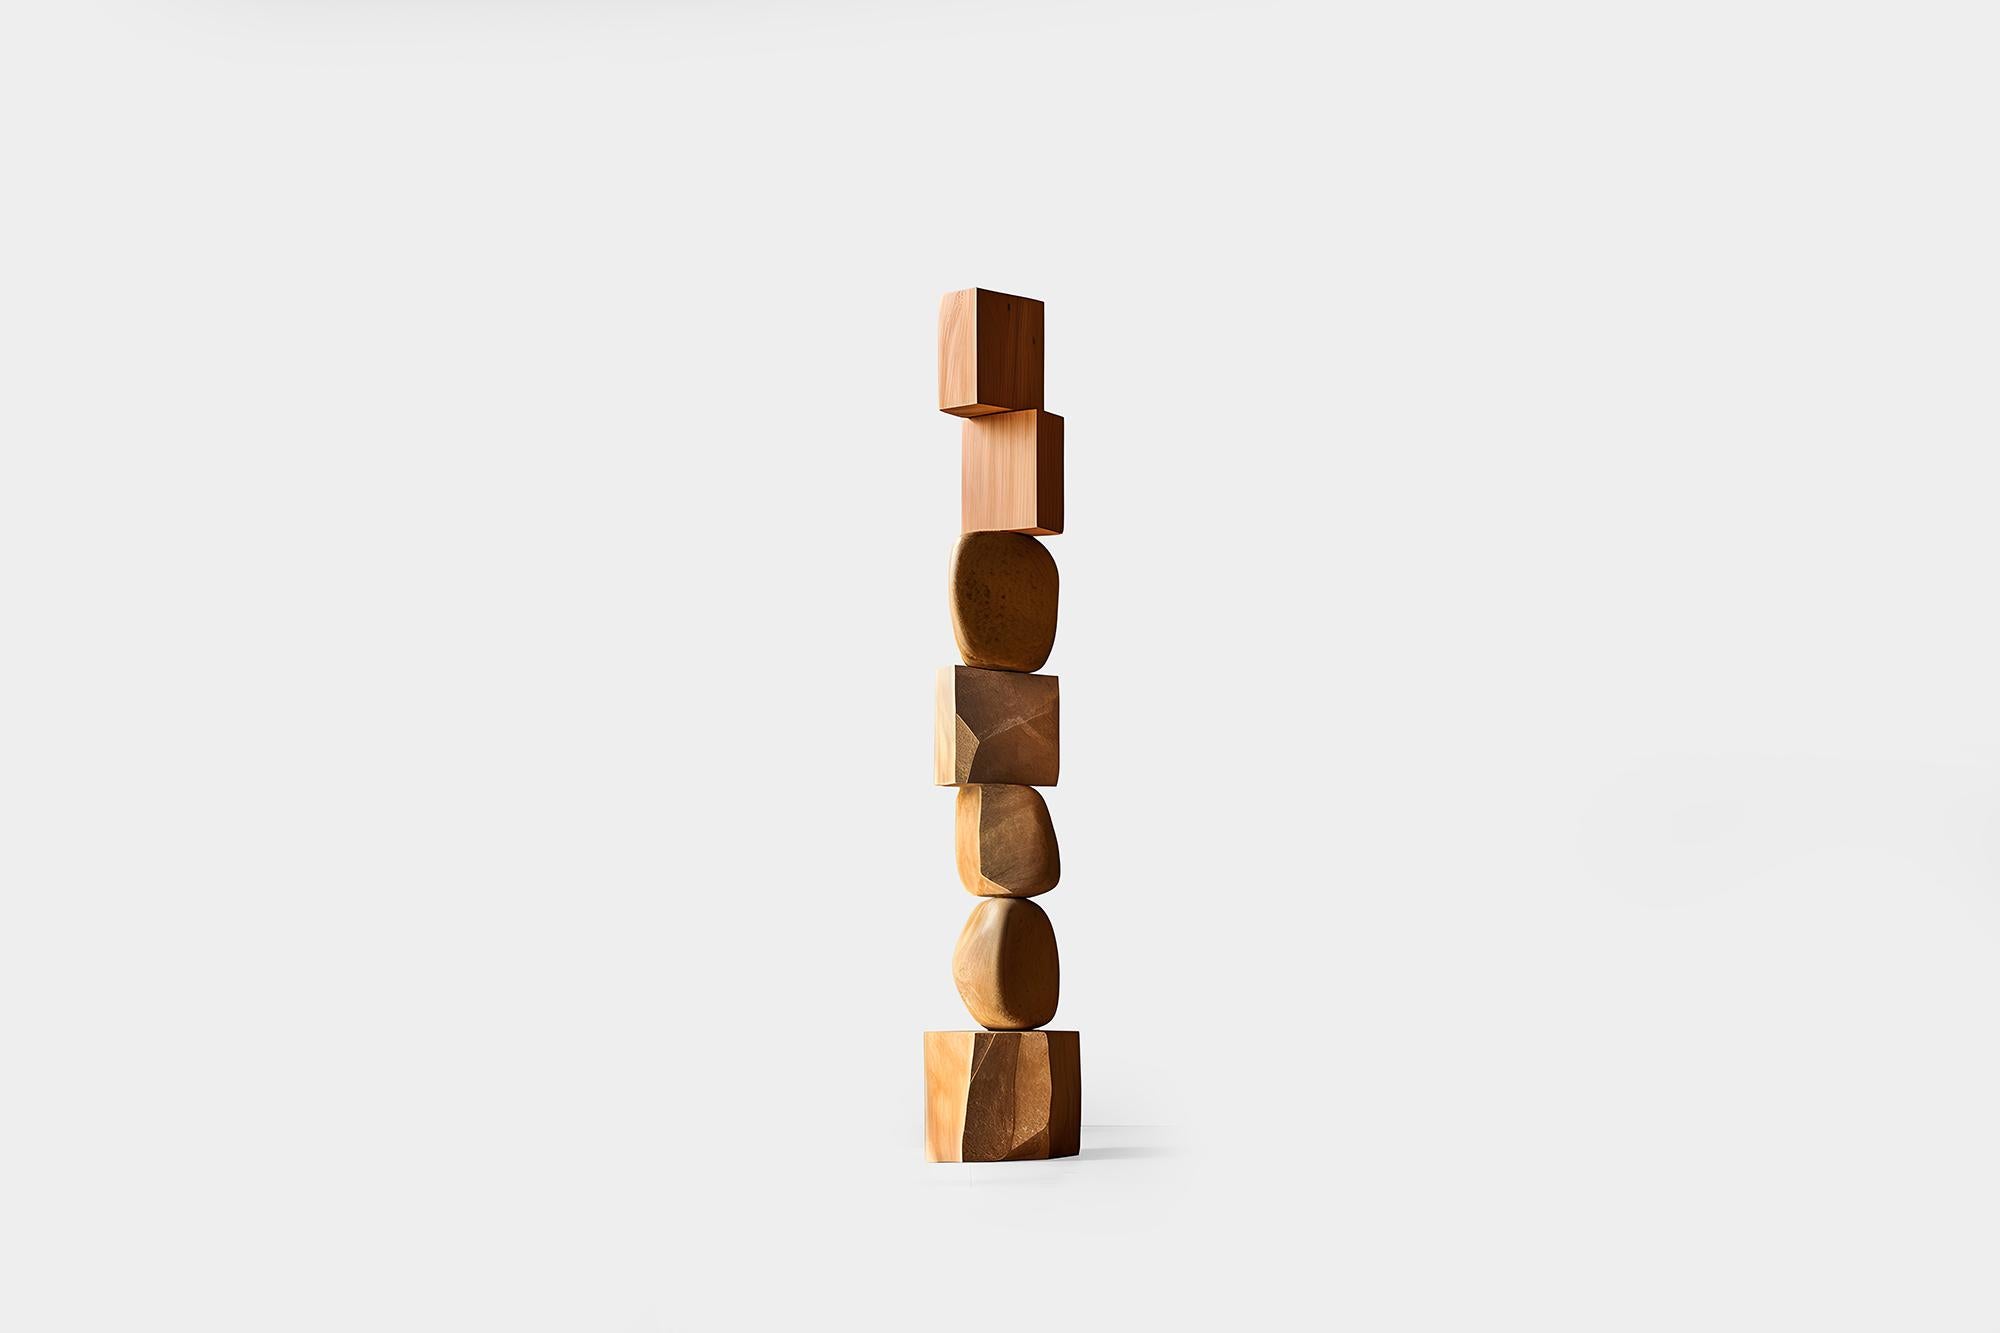 Mexican Abstract Wooden Serenity Still Stand No75 by NONO, Modern Escalona Sculpture For Sale